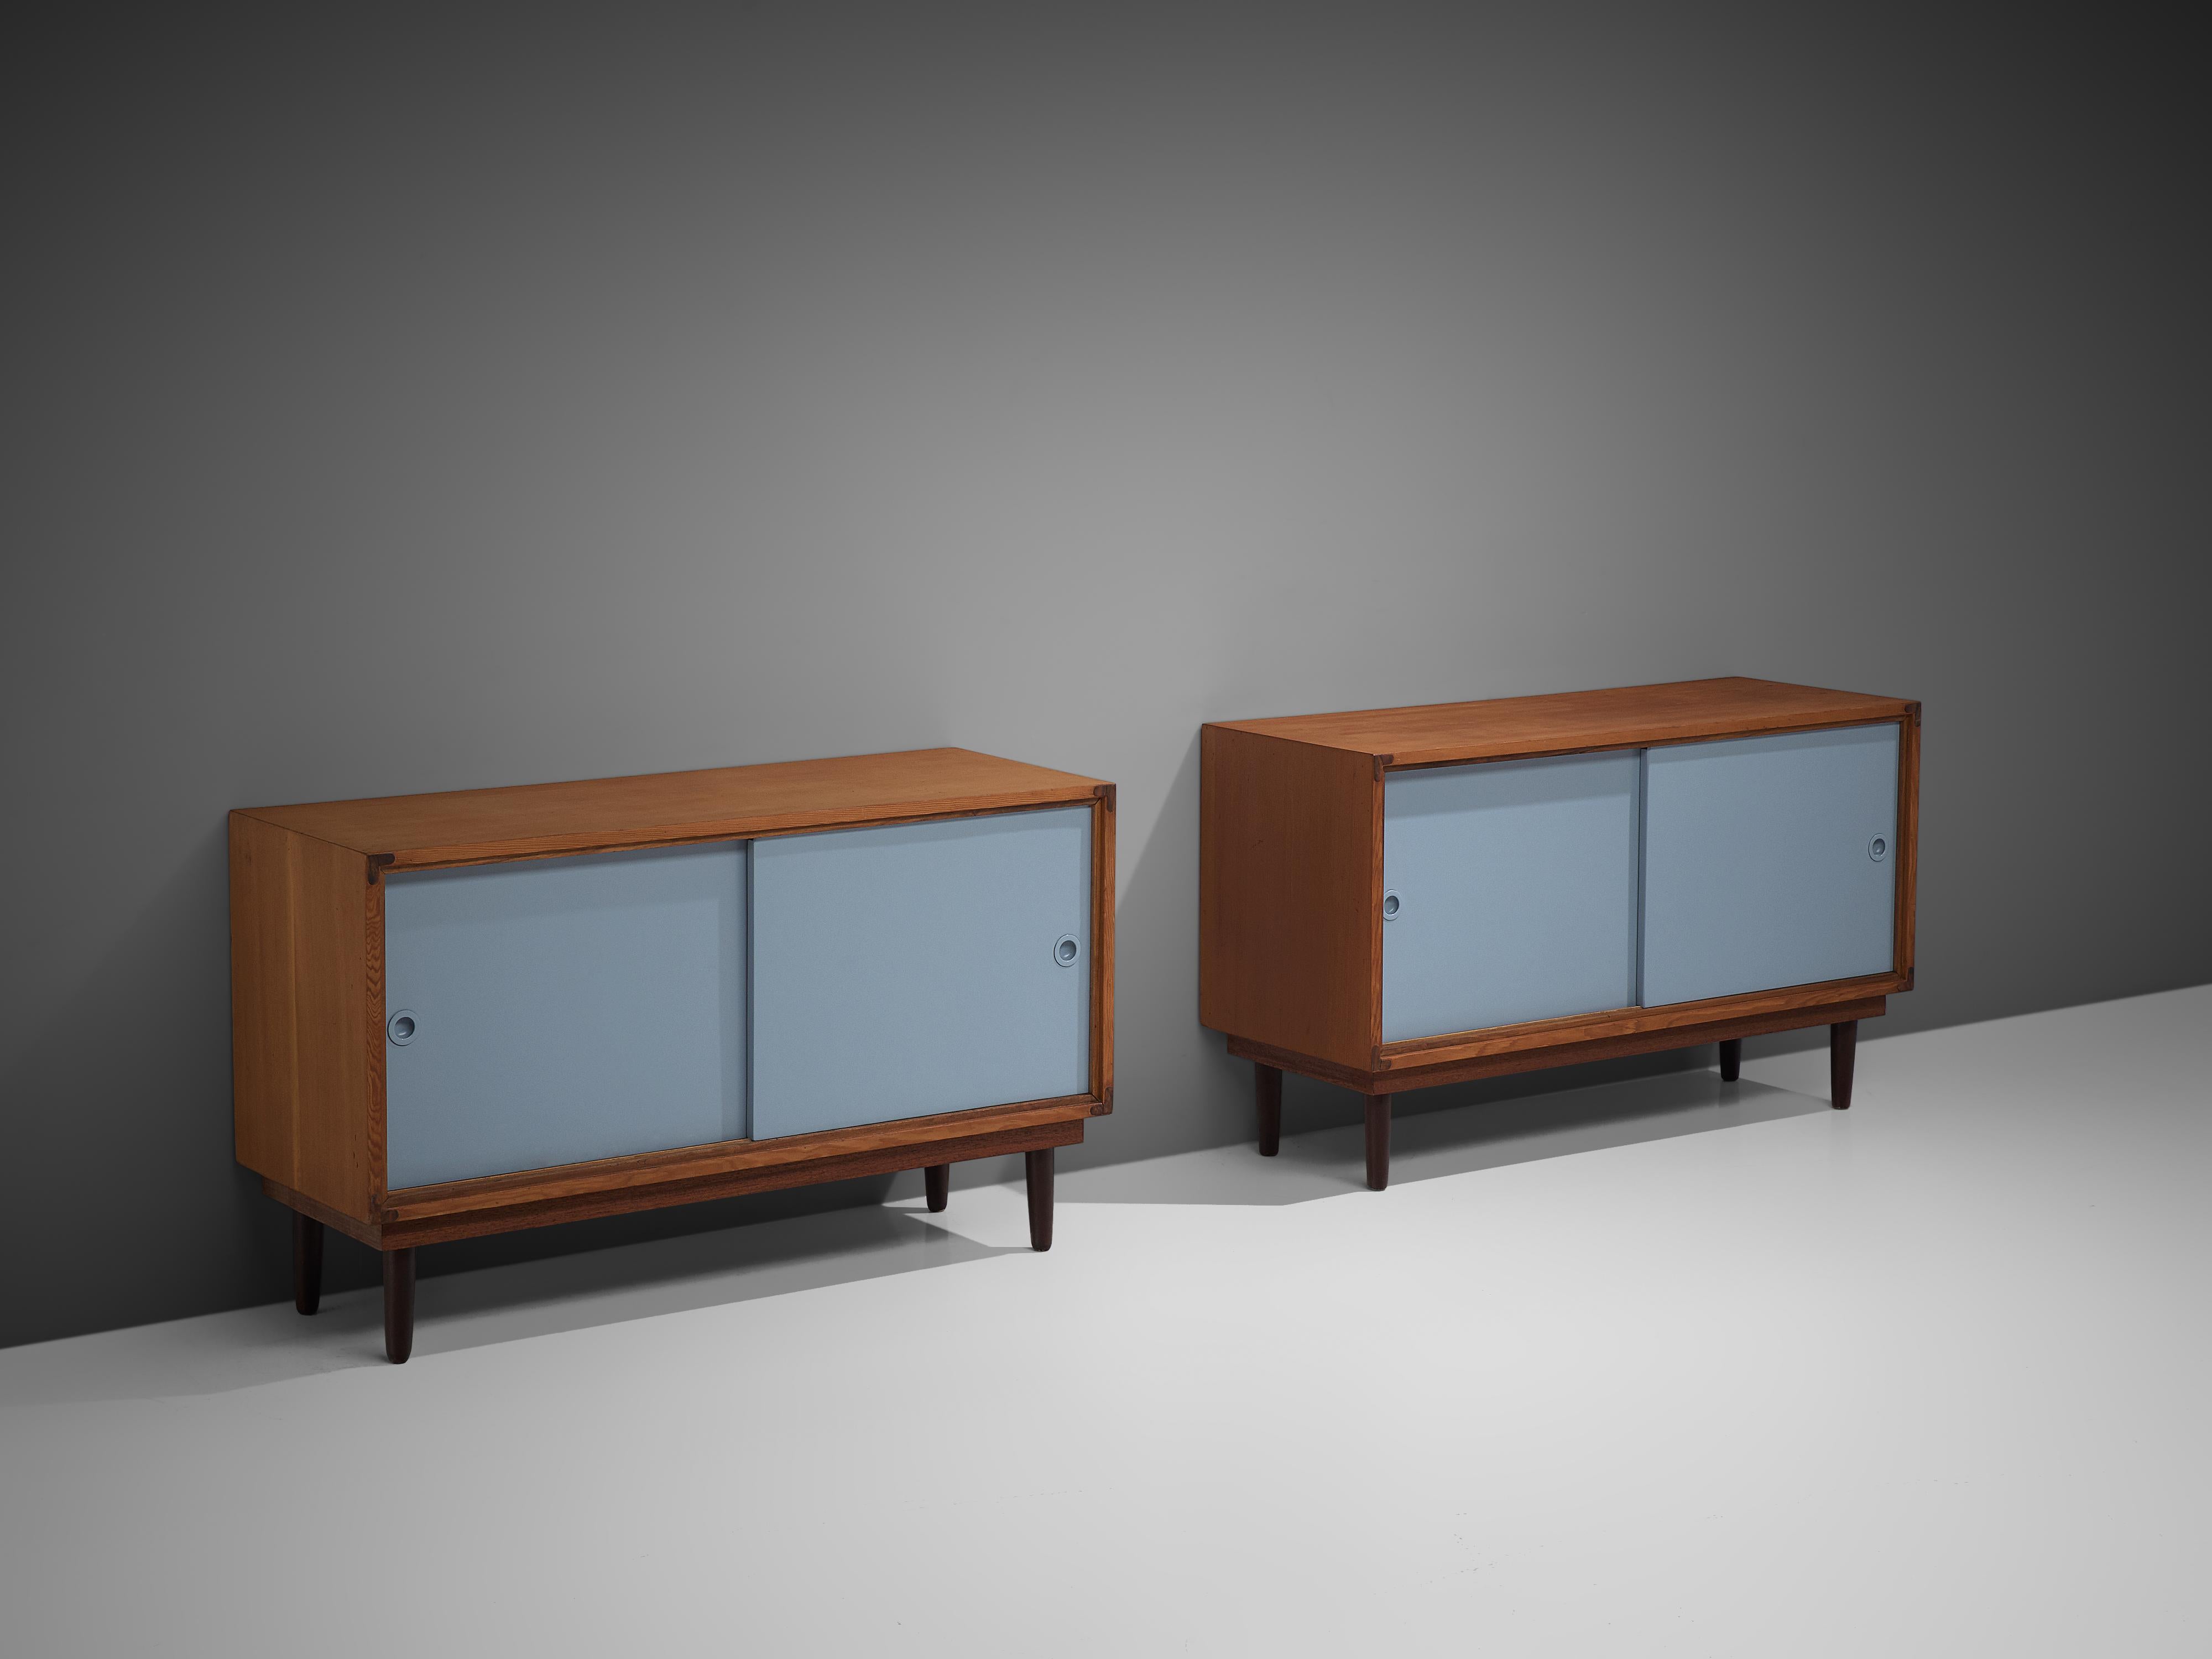 Cabinets, solid pine, lacquered wood, Denmark, 1950s

These cabinets embody a simplistic design, with a rectangular front placed on tapered round legs. The warm expression of the wood nicely combines with the soft blue sliding doors. With the subtle